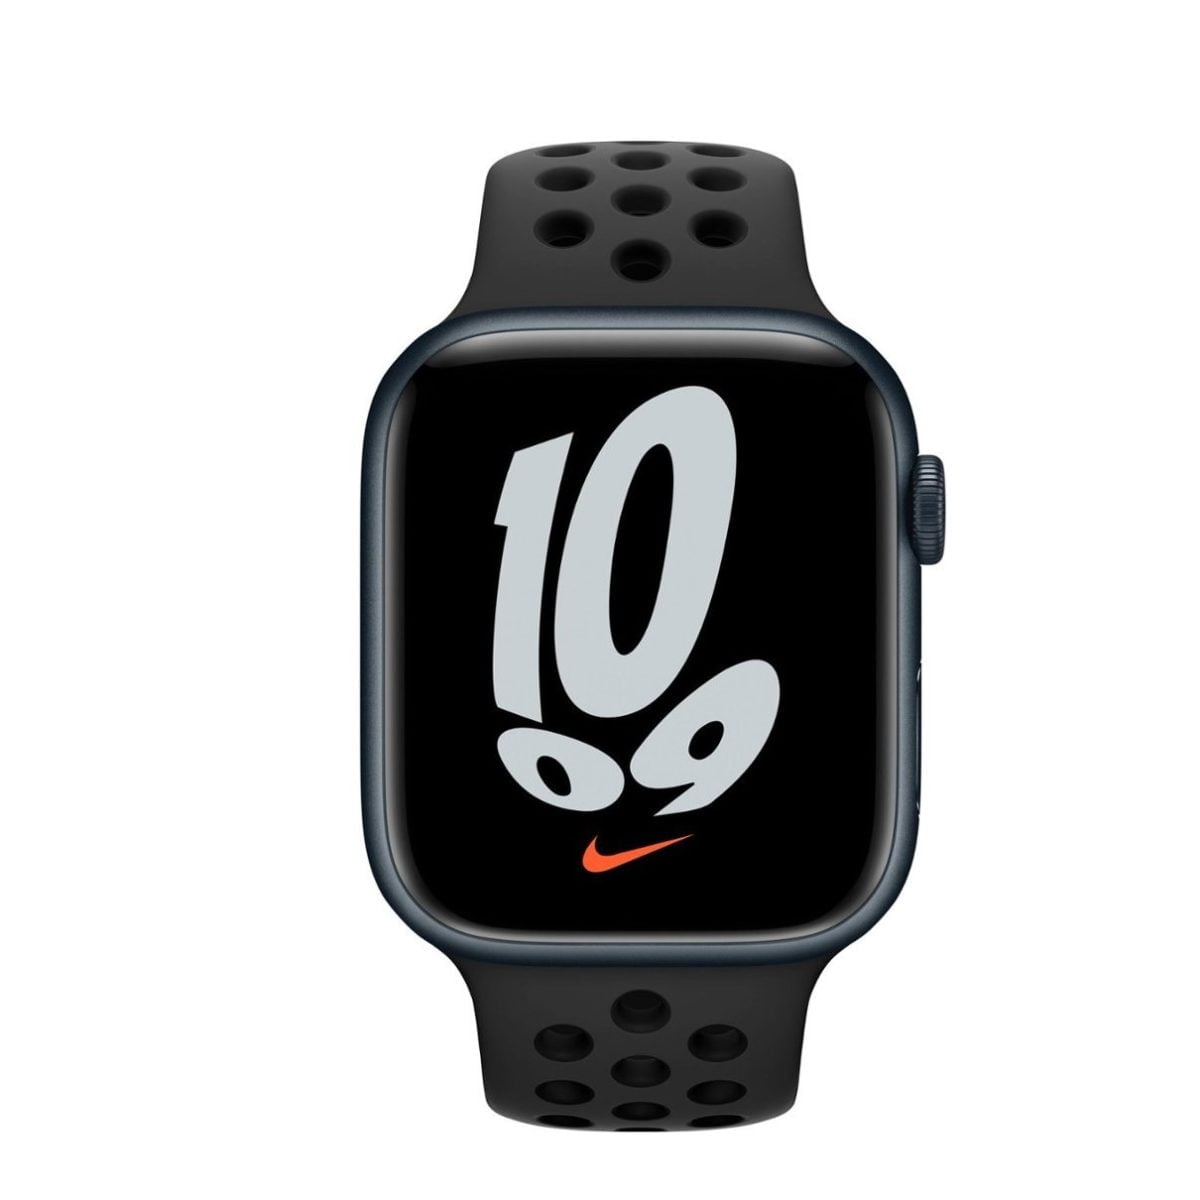 5706677Cv11D Apple &Lt;H1&Gt;Apple Watch Nike Series 7 (Gps) 45Mm Nike Sport Band - Midnight&Lt;/H1&Gt; &Lt;H2&Gt;Model: Mknc3&Lt;/H2&Gt; Https://Www.youtube.com/Watch?V=Mmdq-Gwbnze &Lt;Div Class=&Quot;Long-Description-Container Body-Copy &Quot;&Gt; &Lt;Div Class=&Quot;Html-Fragment&Quot;&Gt; &Lt;Div&Gt; &Lt;Div&Gt;The Largest, Most Advanced Always-On Retina Display Yet Makes Everything You Do With Your Apple Watch Series 7 Bigger And Better. Series 7 Is The Most Durable Apple Watch Ever Built, With An, Even More, Crack-Resistant Front Crystal. Advanced Features Let You Measure Your Blood Oxygen Level,¹ Take An Ecg Anytime,² And Access Mindfulness And Sleep Tracking Apps. You Can Also Track Dozens Of Workouts, Including New Tai Chi And Pilates.&Lt;/Div&Gt; &Lt;/Div&Gt; &Lt;/Div&Gt; &Lt;/Div&Gt; Apple Watch Nike Series Apple Watch Nike Series 7 (Gps) And Cellular 45Mm - Midnight